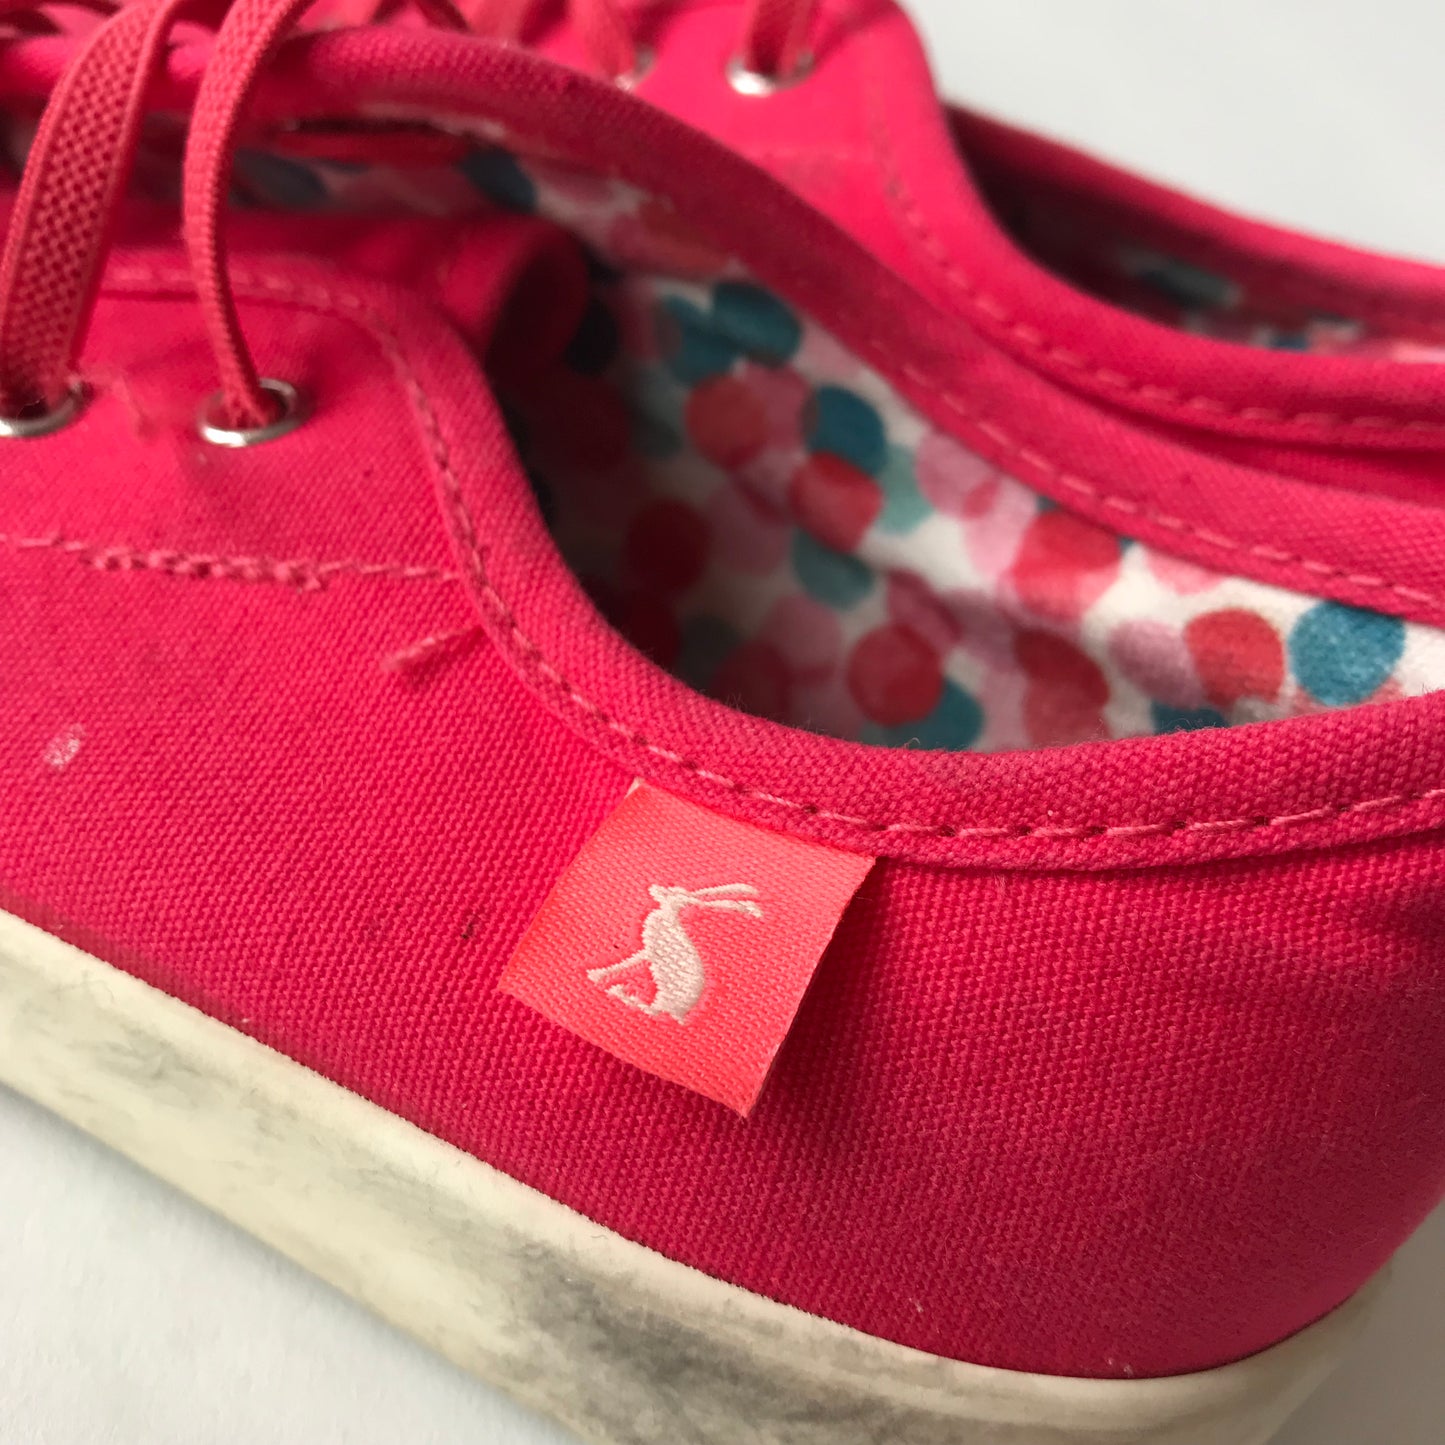 Joules Pink Trainers Shoe Size 2